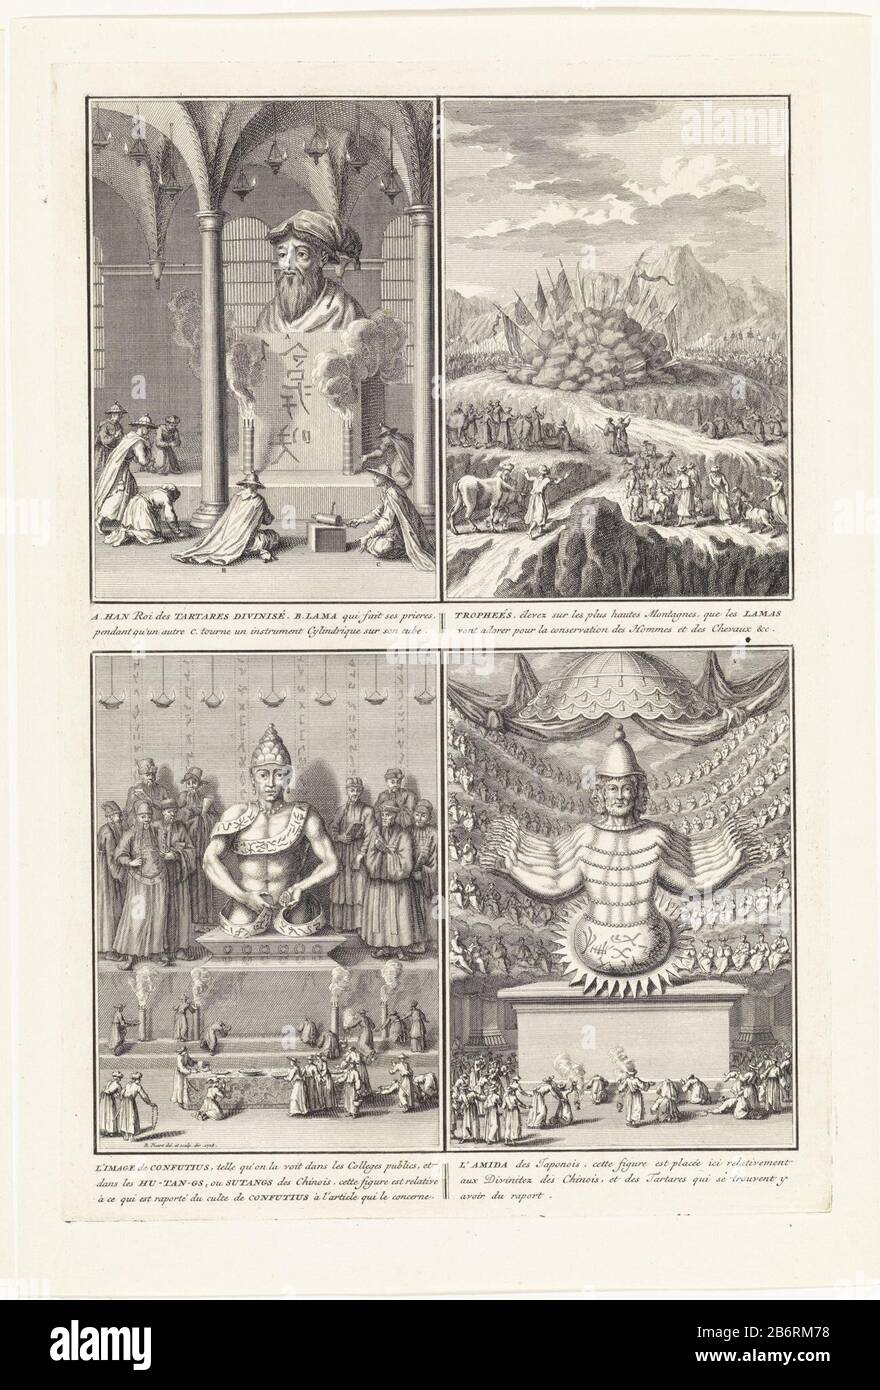 Leaf with four performances of Buddhist gods, Confucius and use in China. Top left: Picture of Han, king of the nation Tangut. For him kneels a llama or priest. Top right: Llamas prayer flags in the mountains. Bottom left: Image and worship of Confucius. Bottom right: The Japanese god Amida. Manufacturer : printmaker: Bernard Picart (studio) supervision: Bernard Picart (listed property) to drawing: Bernard Picart (listed property) Place manufacture: Amsterdam Date: 1728 Physical features: etching and engra material: paper Technique: etching / engra (printing process) Measurements: sheet margin Stock Photo